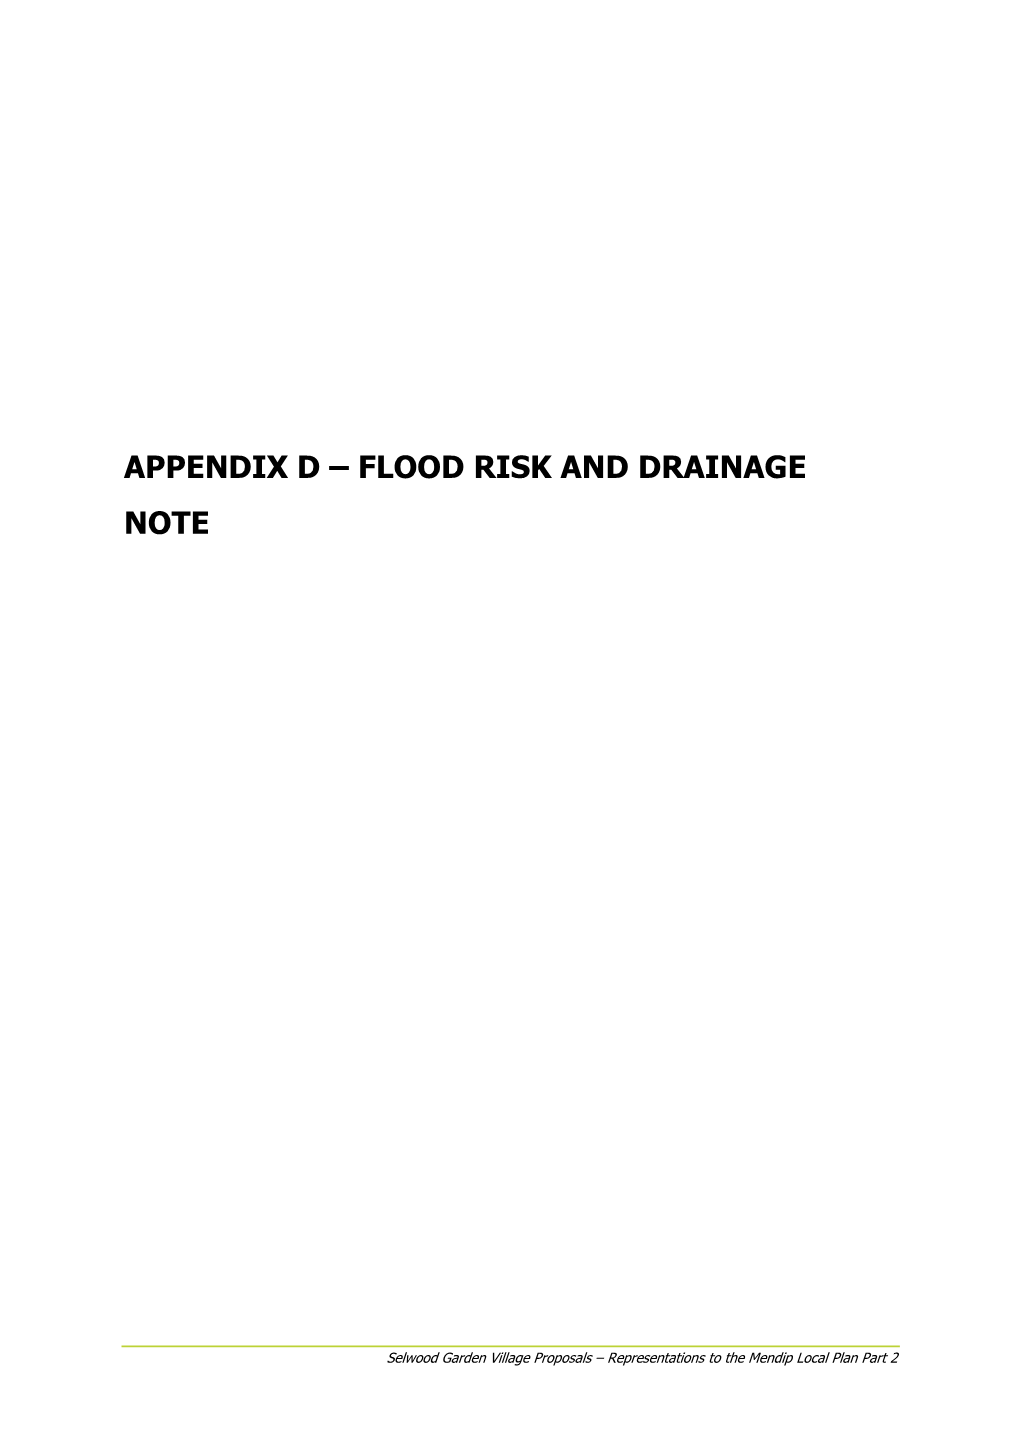 Flood Risk and Drainage Note